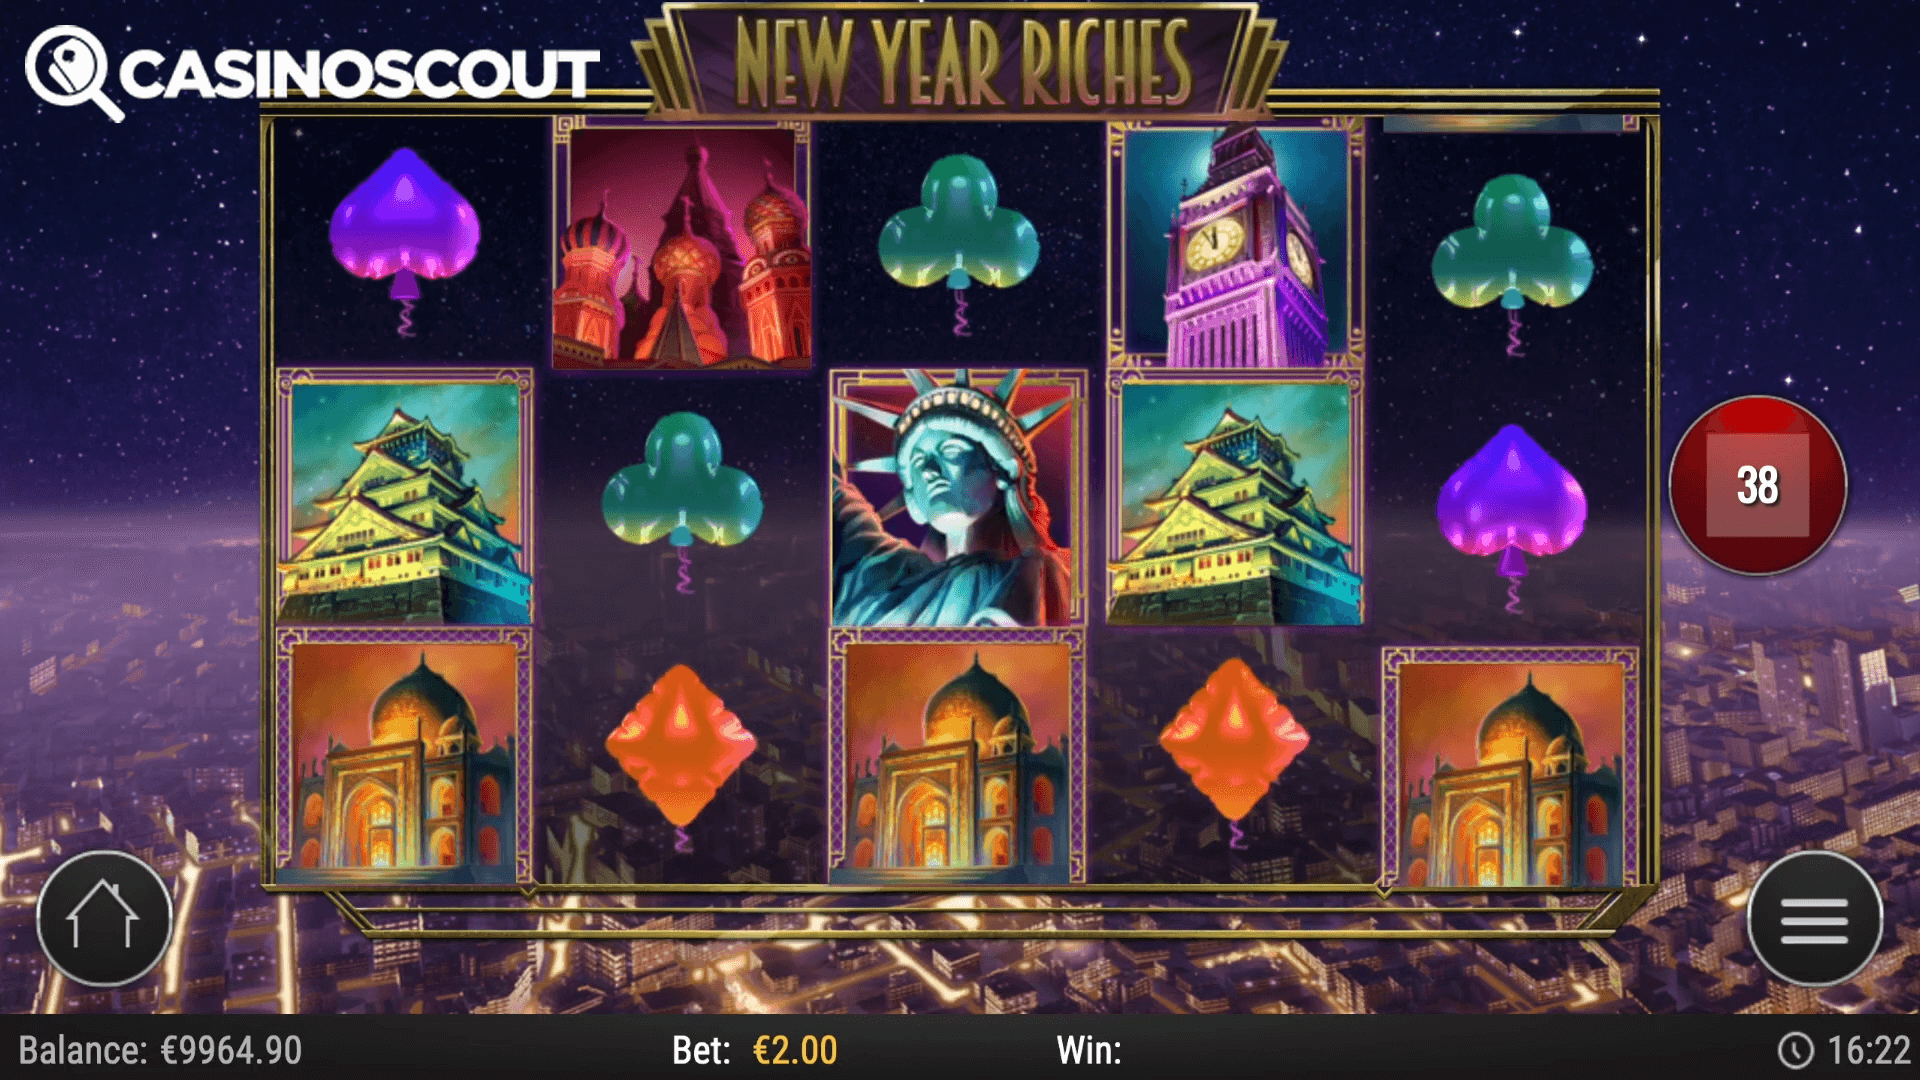 New Year Riches Review